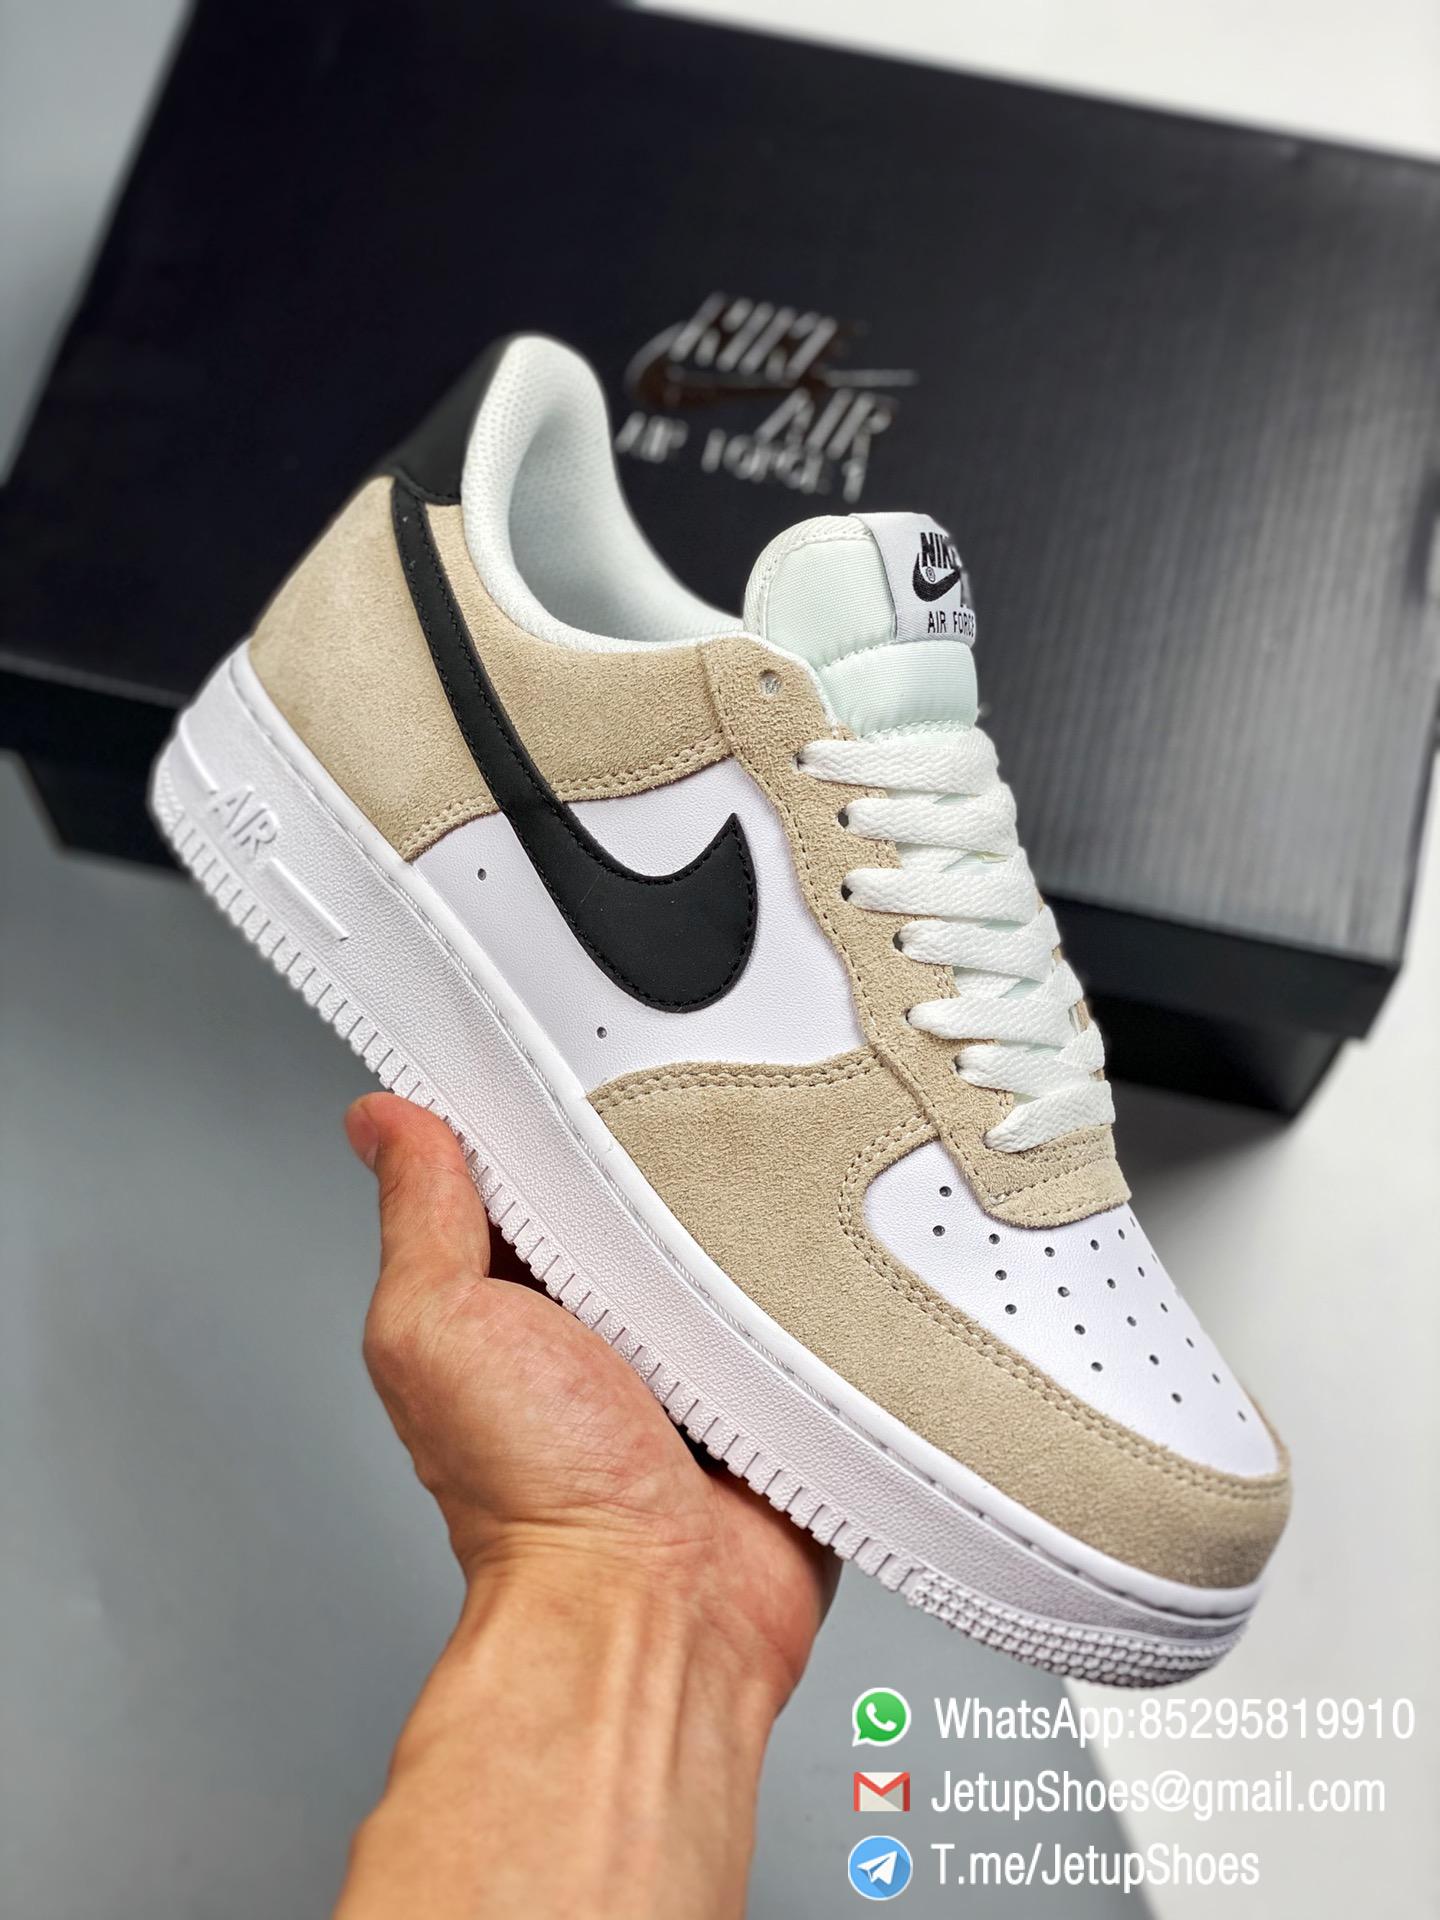 RepSneakers Wmns Air Force 1 Low Pixel Desert Sand Mixed Leather and Cream Suede Base Best Replica Sneakers 0